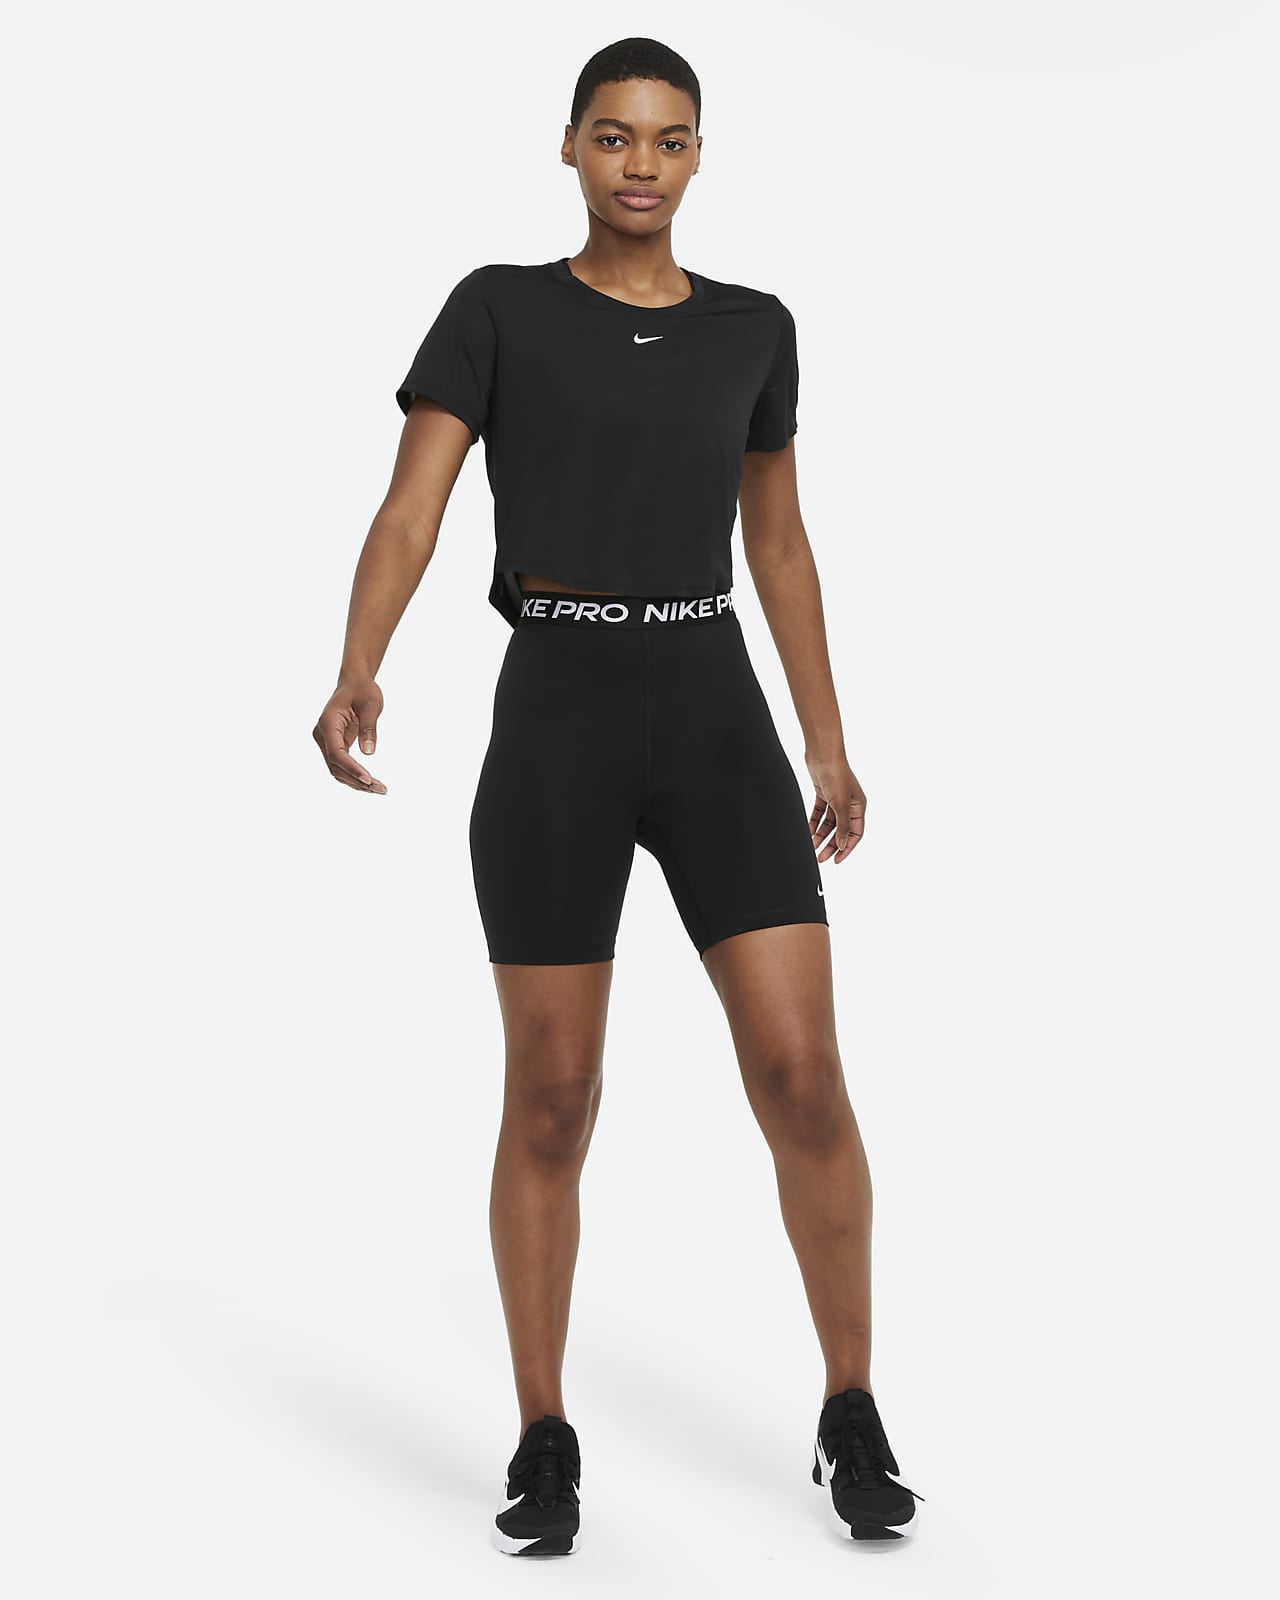 Nike Dri-FIT One Women's Standard Fit Short-Sleeve Cropped Top.